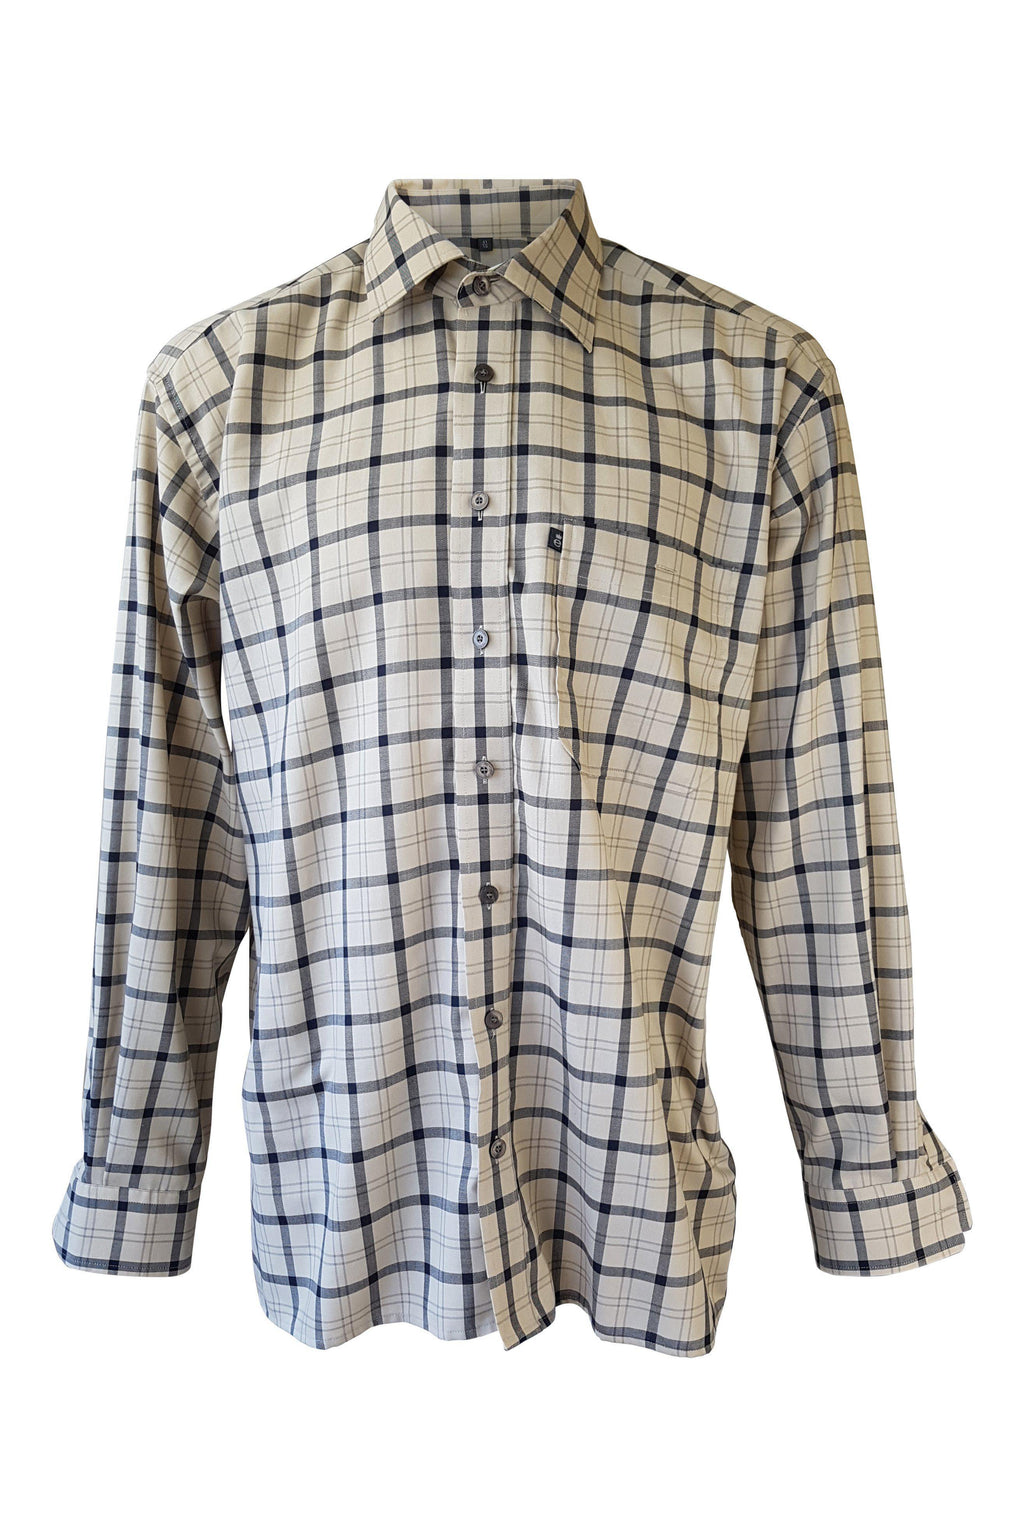 ETERNA Excellent Cream Black Checked Shirt (41/16)-Eterna Excellent-The Freperie